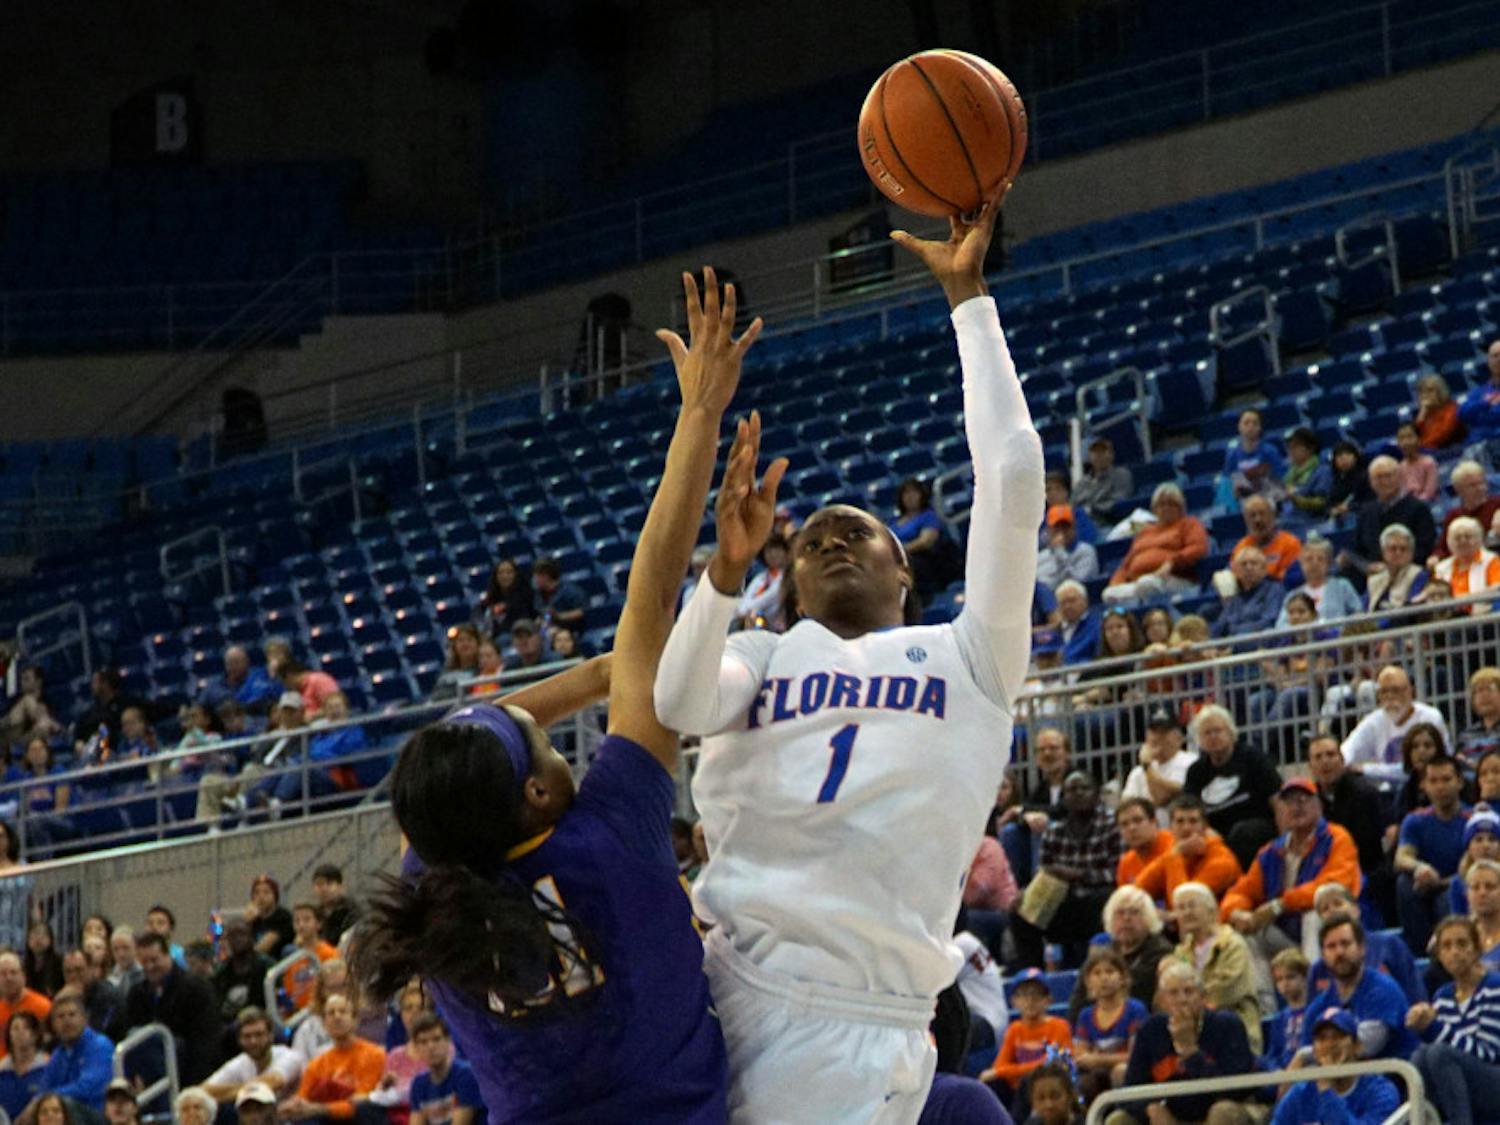 UF forward Ronni Williams goes for a layup during Florida's 53-45 win against LSU on Jan. 17, 2016, in the O'Connell Center.